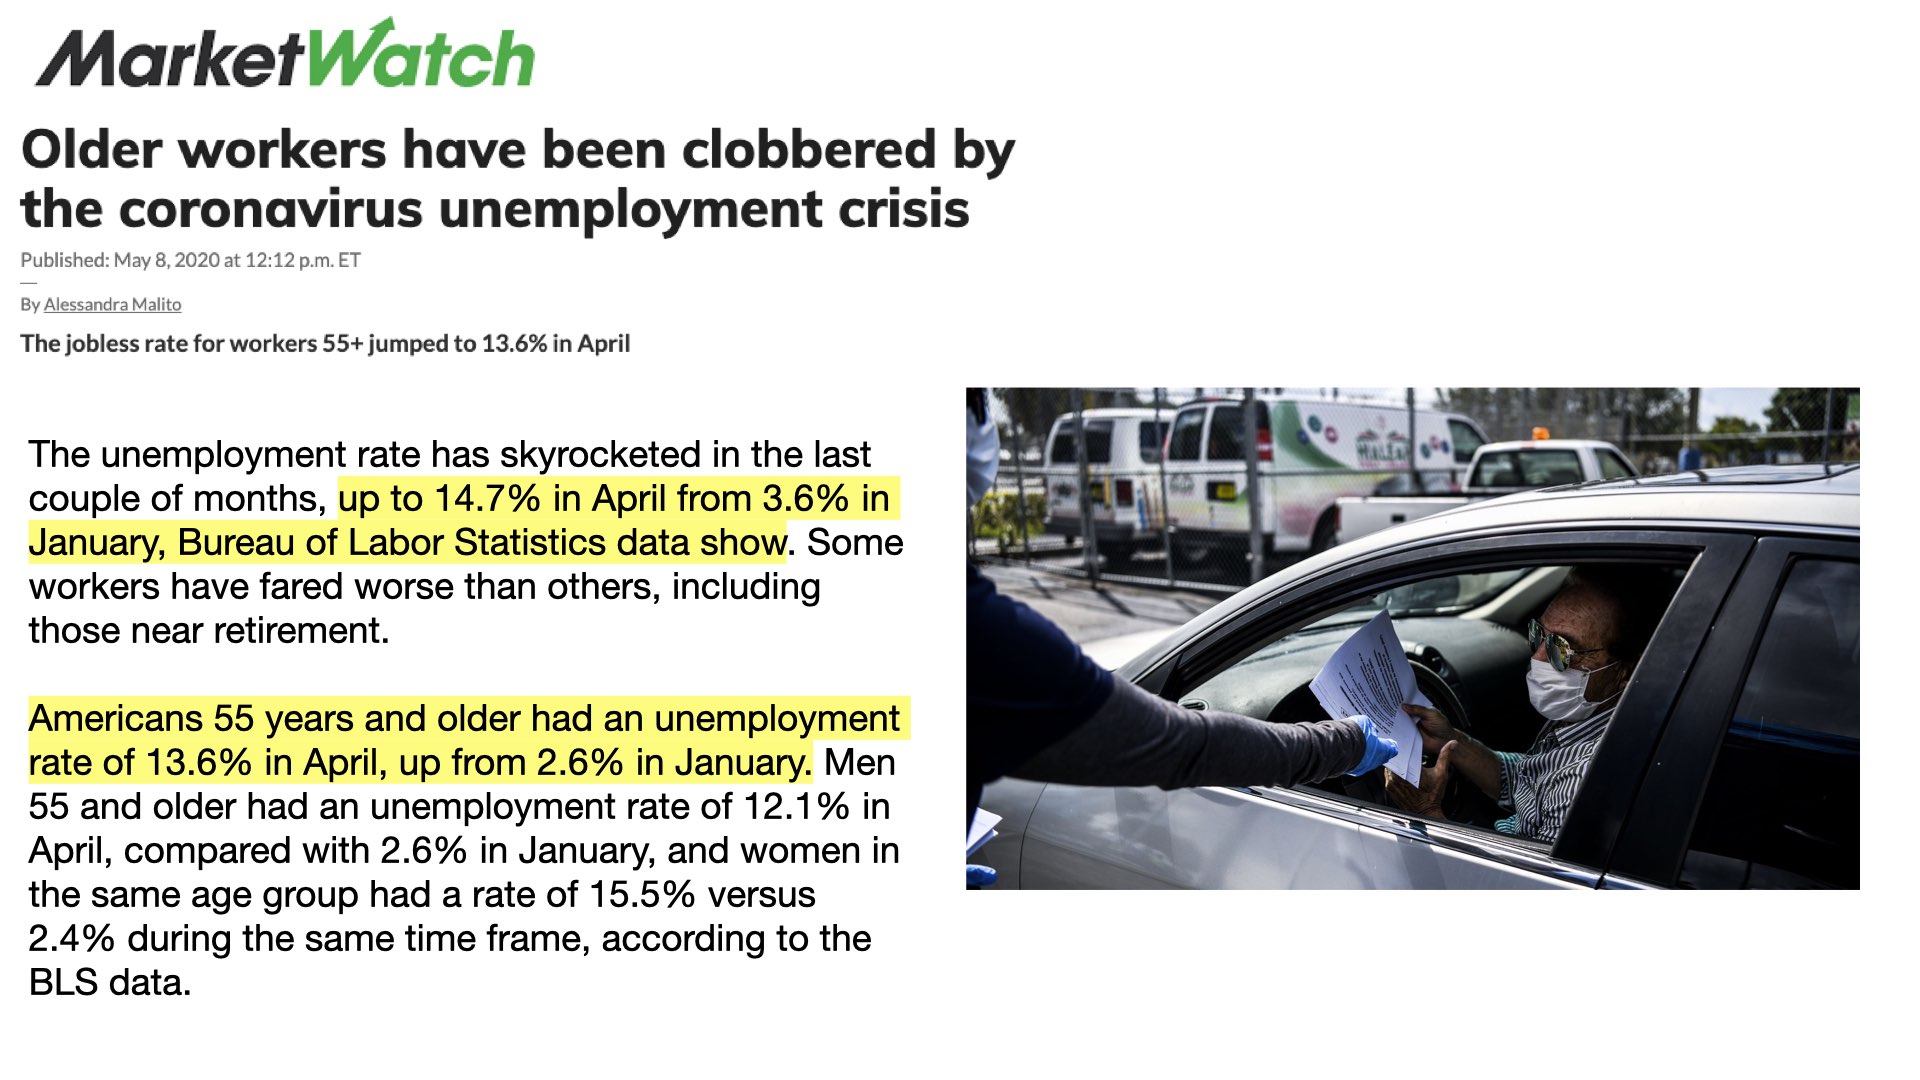 MarketWatch noted Americans 55 and older have been clobbered by the coronavirus’ economic fallout. In January of this year MarketWatch notes the unemployment rate for those 55 and older was 2.6%. By April that unemployment number jumped to 13.6%. 